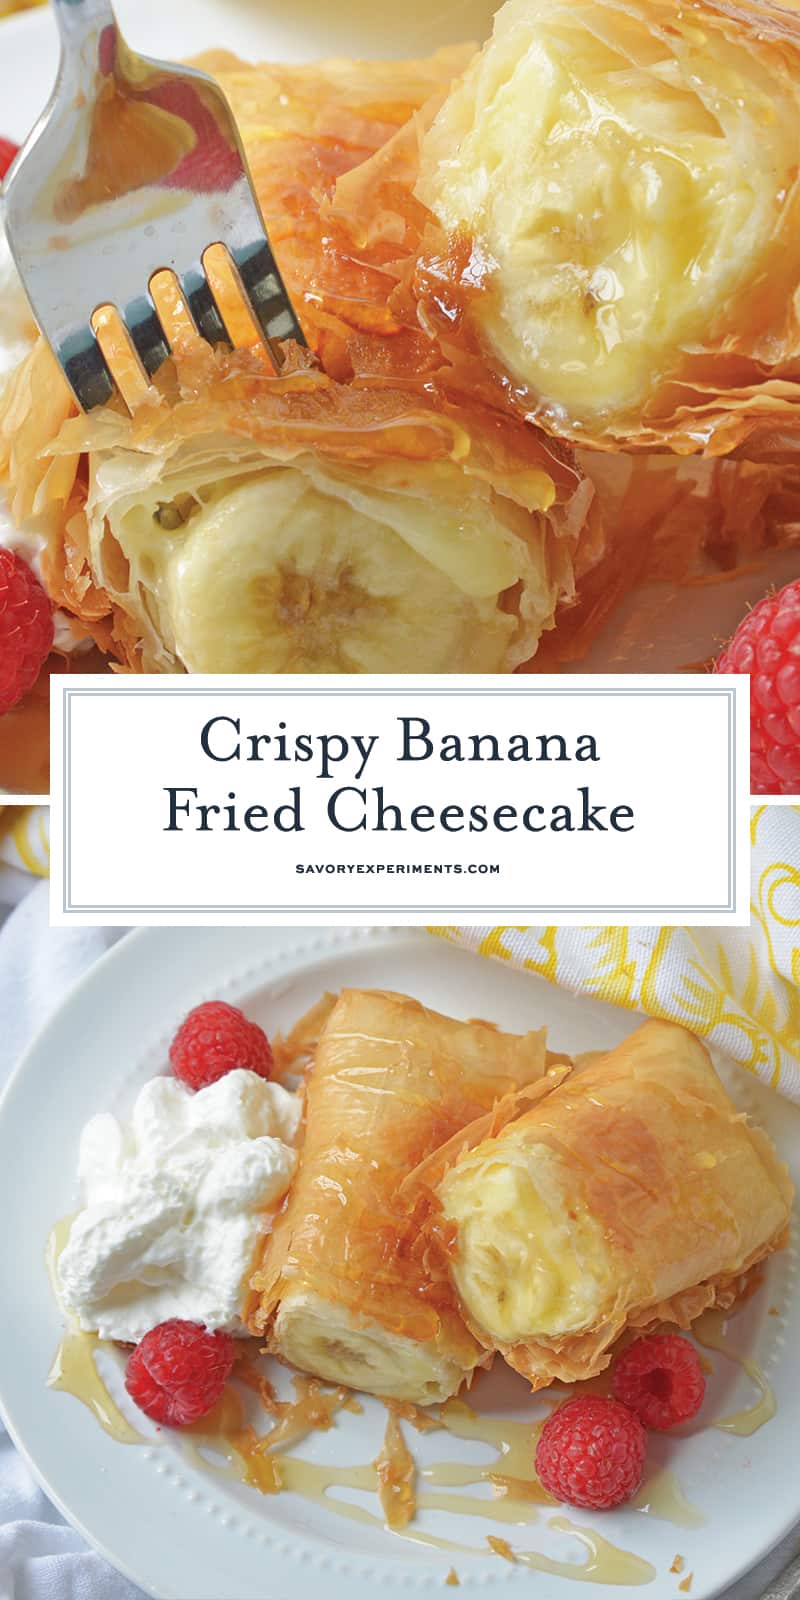 This Banana Fried Cheesecake recipe will become one of your all time favorite desserts! They are fried golden brown to perfection and drizzled with honey. #friedcheesecake #bananaspringrolls www.savoryexperiments.com